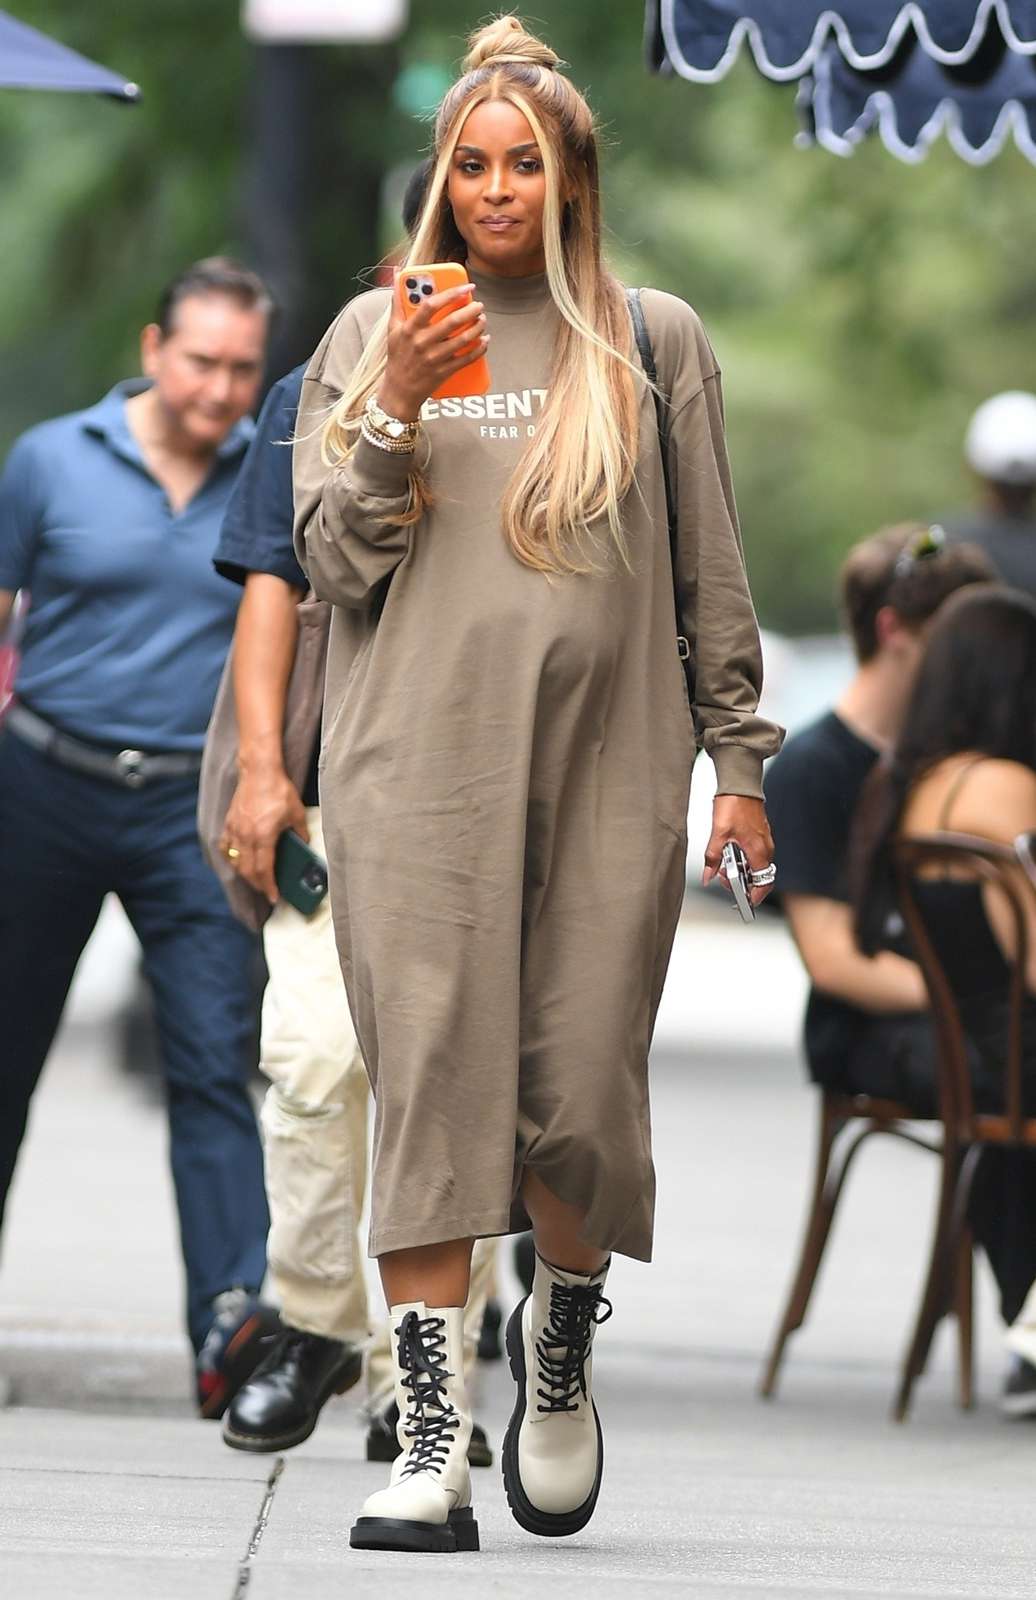 Ciara looks stunning in her Brown long-sleeve midi dress as she grabs brunch at Sadelle's in NYC